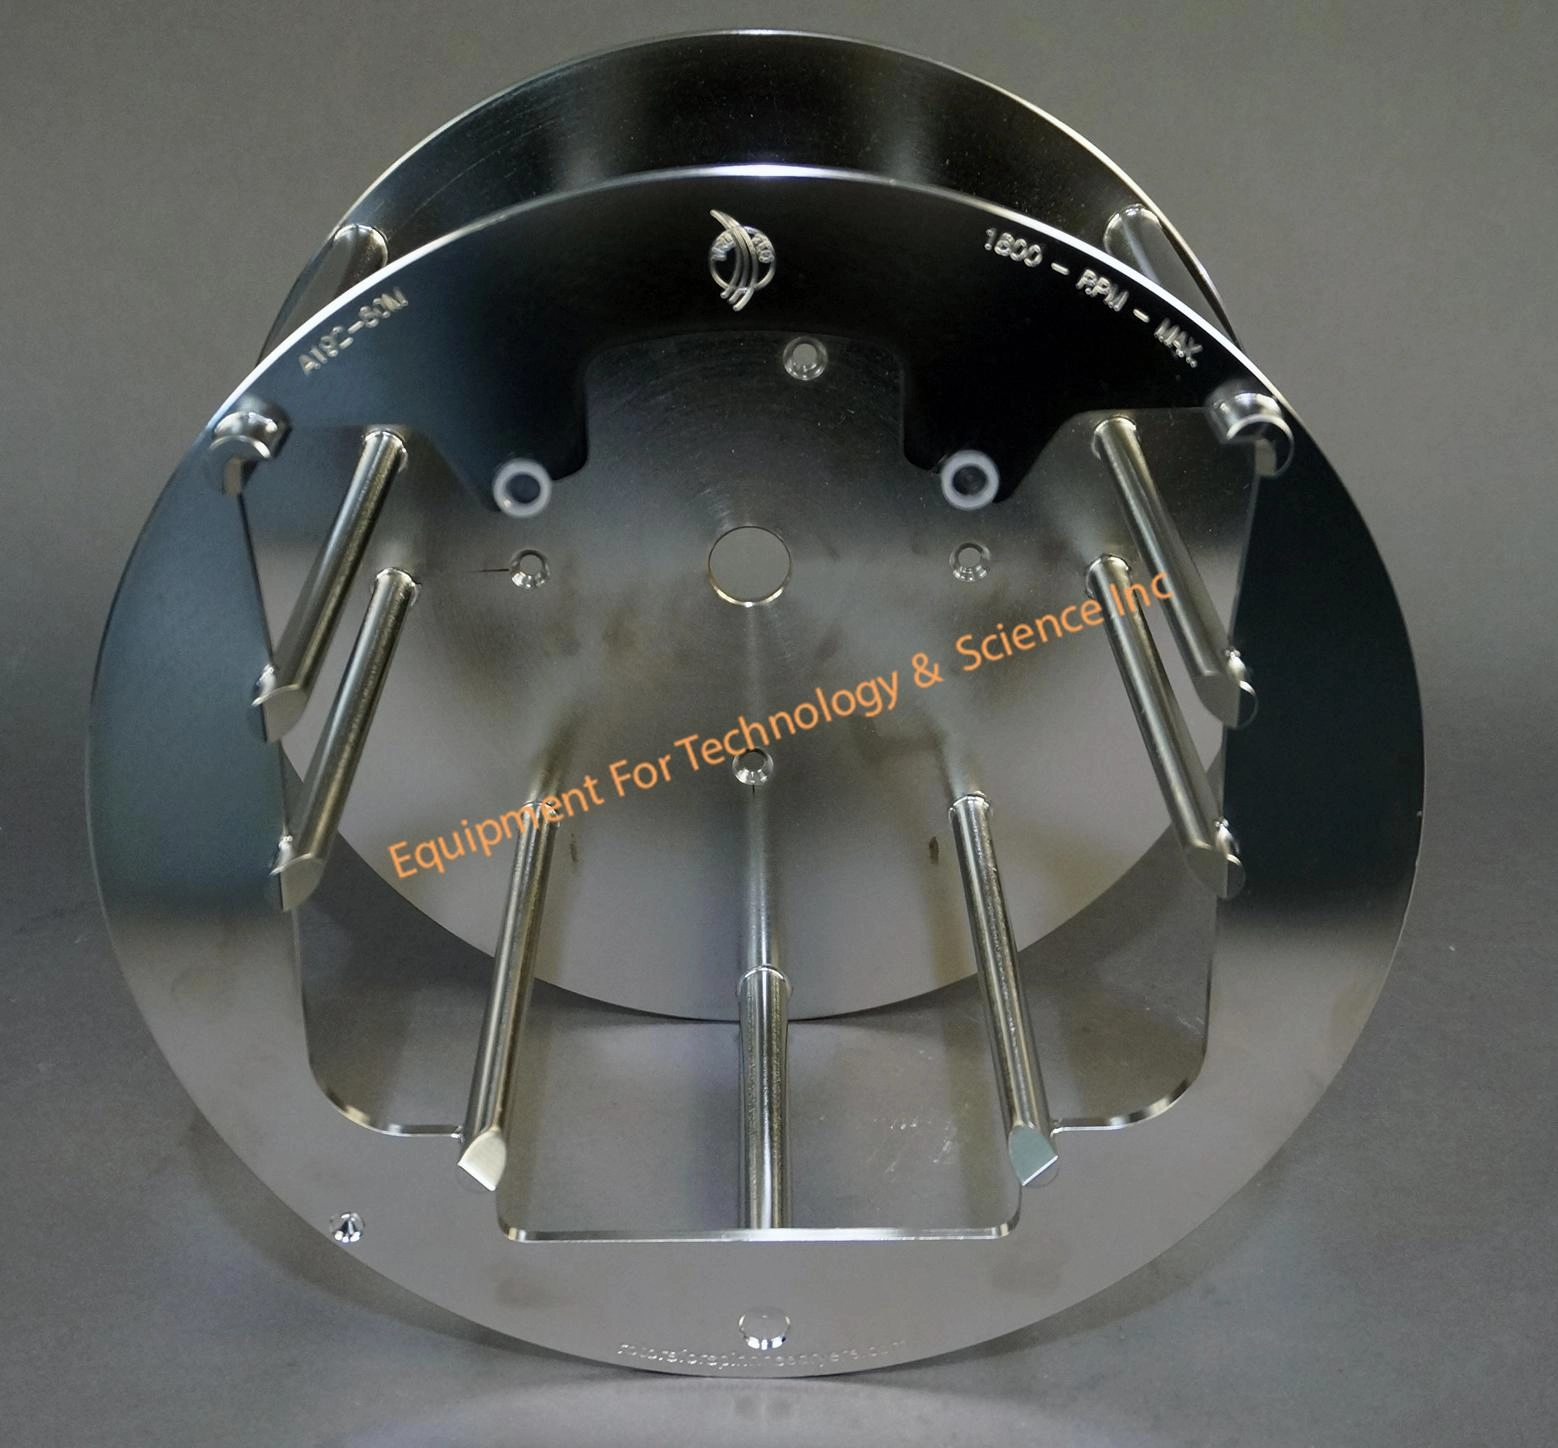 Verteq A182-80M rotor for 200mm wafers (3267)